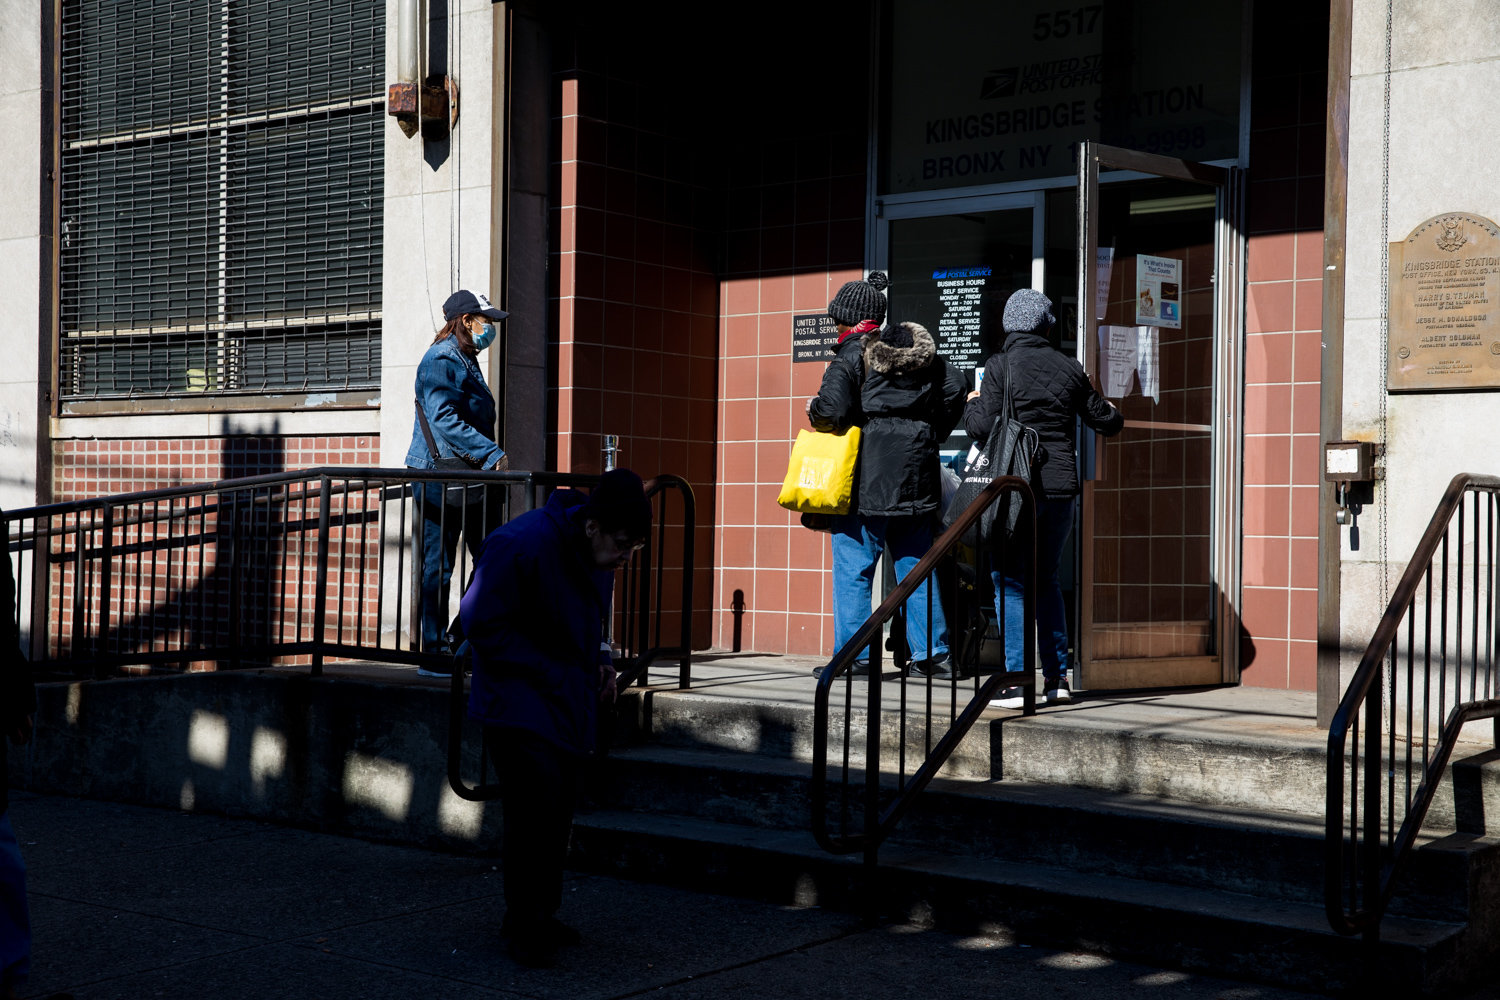 People enter and leave the post office on Broadway, which has recently suffered from understaffing — one of the reported causes of slowdown in mail delivery throughout the community.